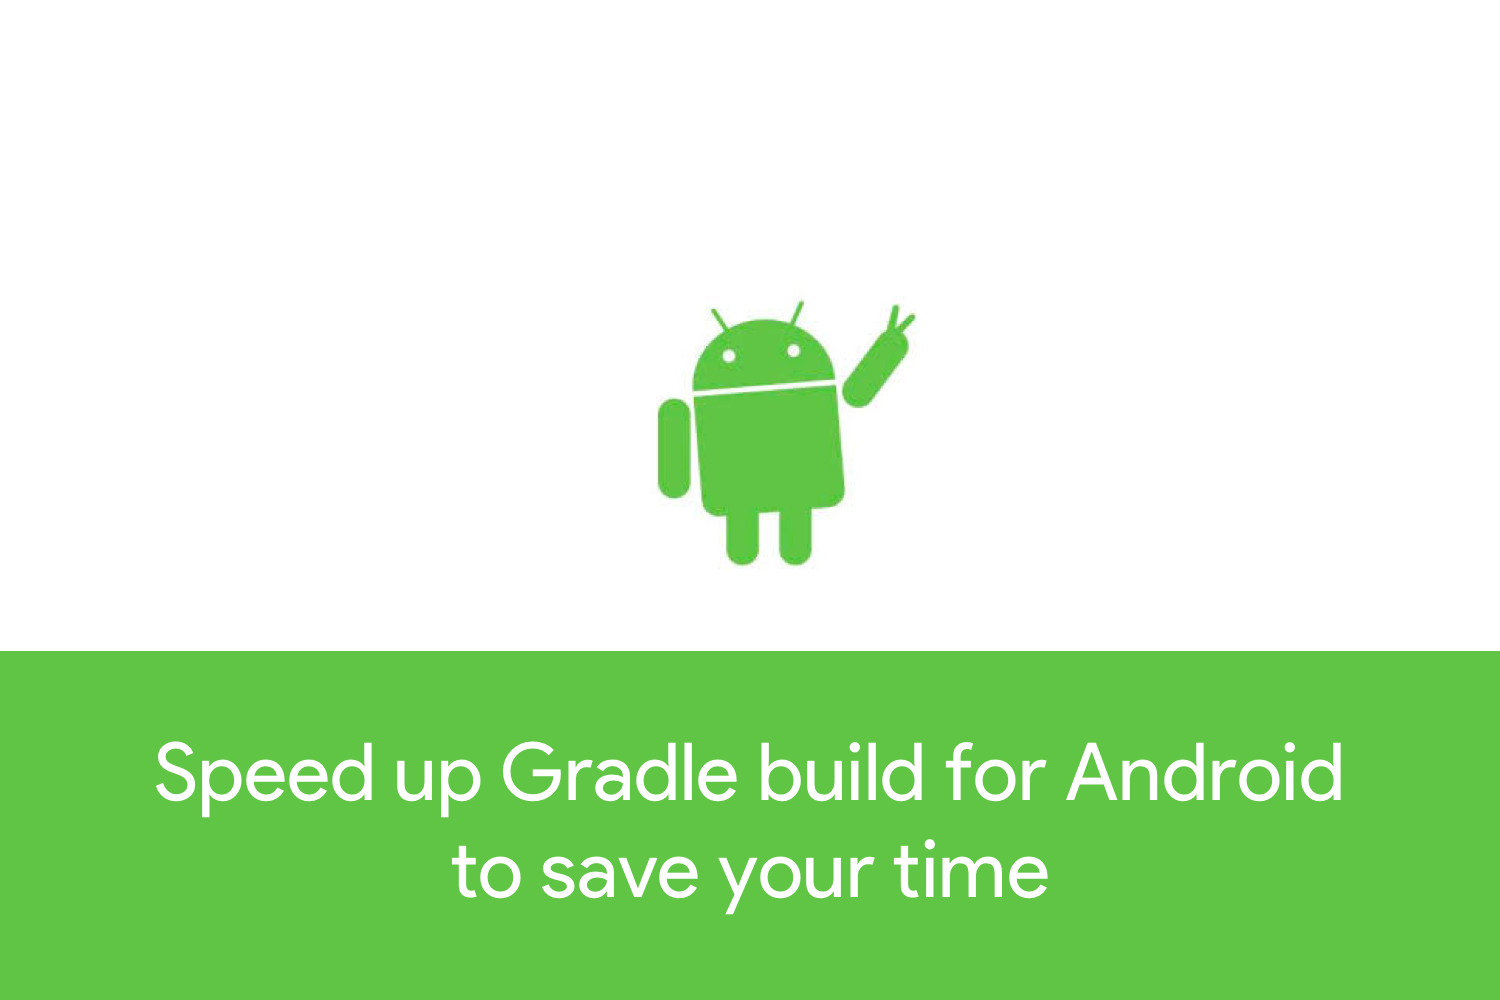 Speed up Gradle build for Android to save your time